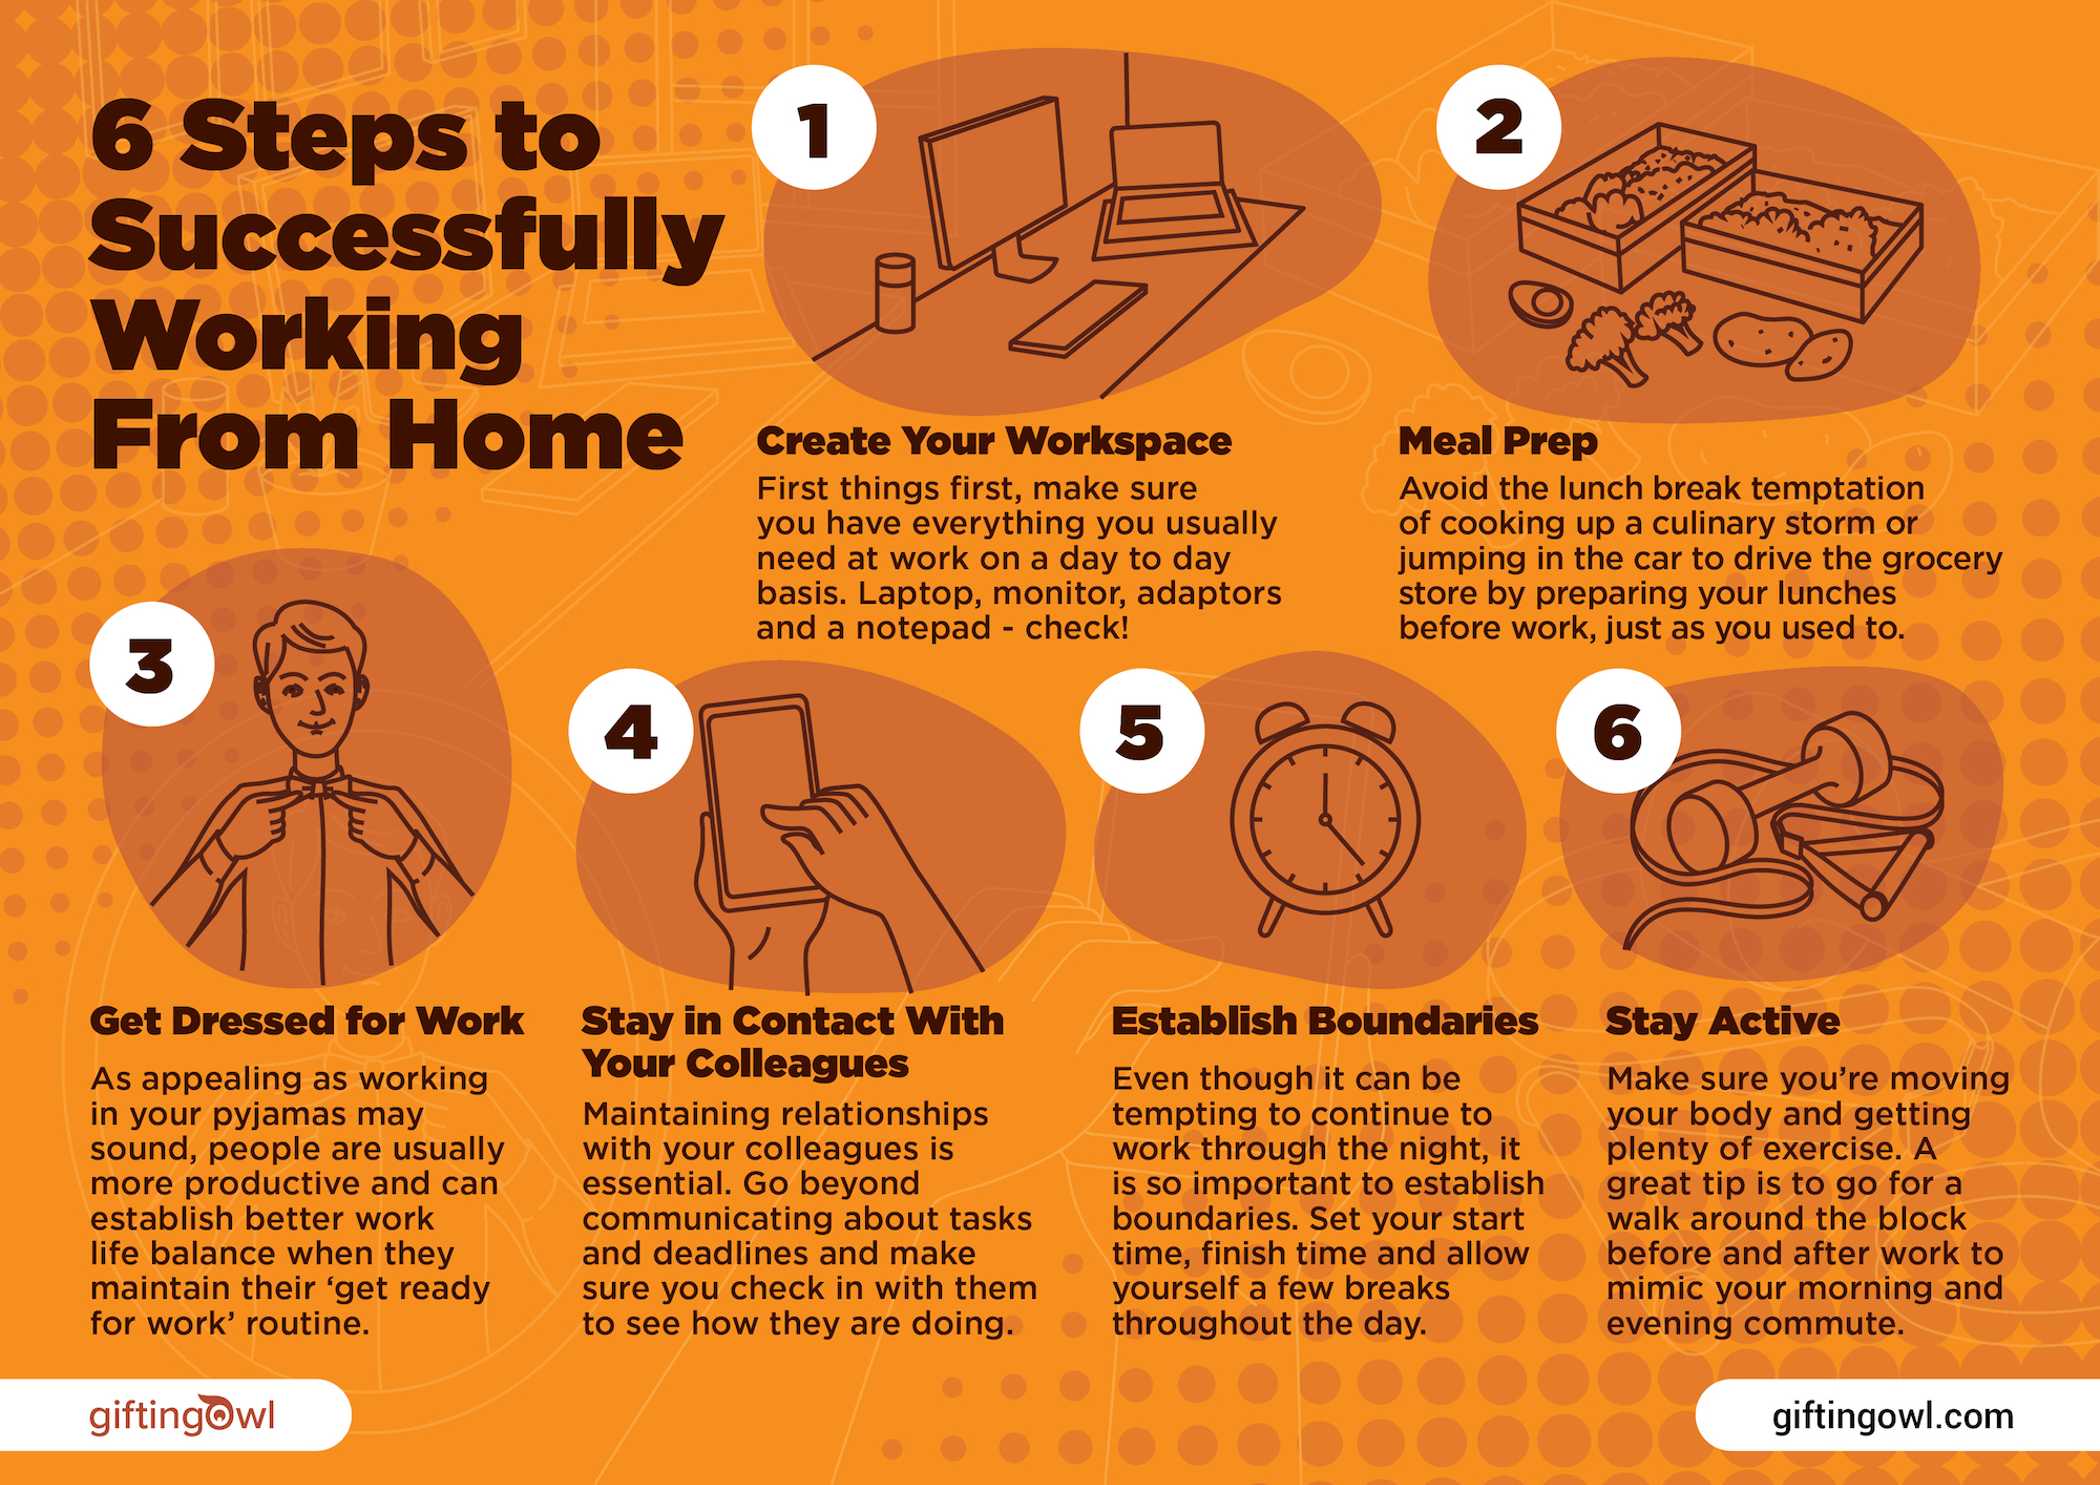 4 Tips on Working From Home During the Coronavirus Outbreak